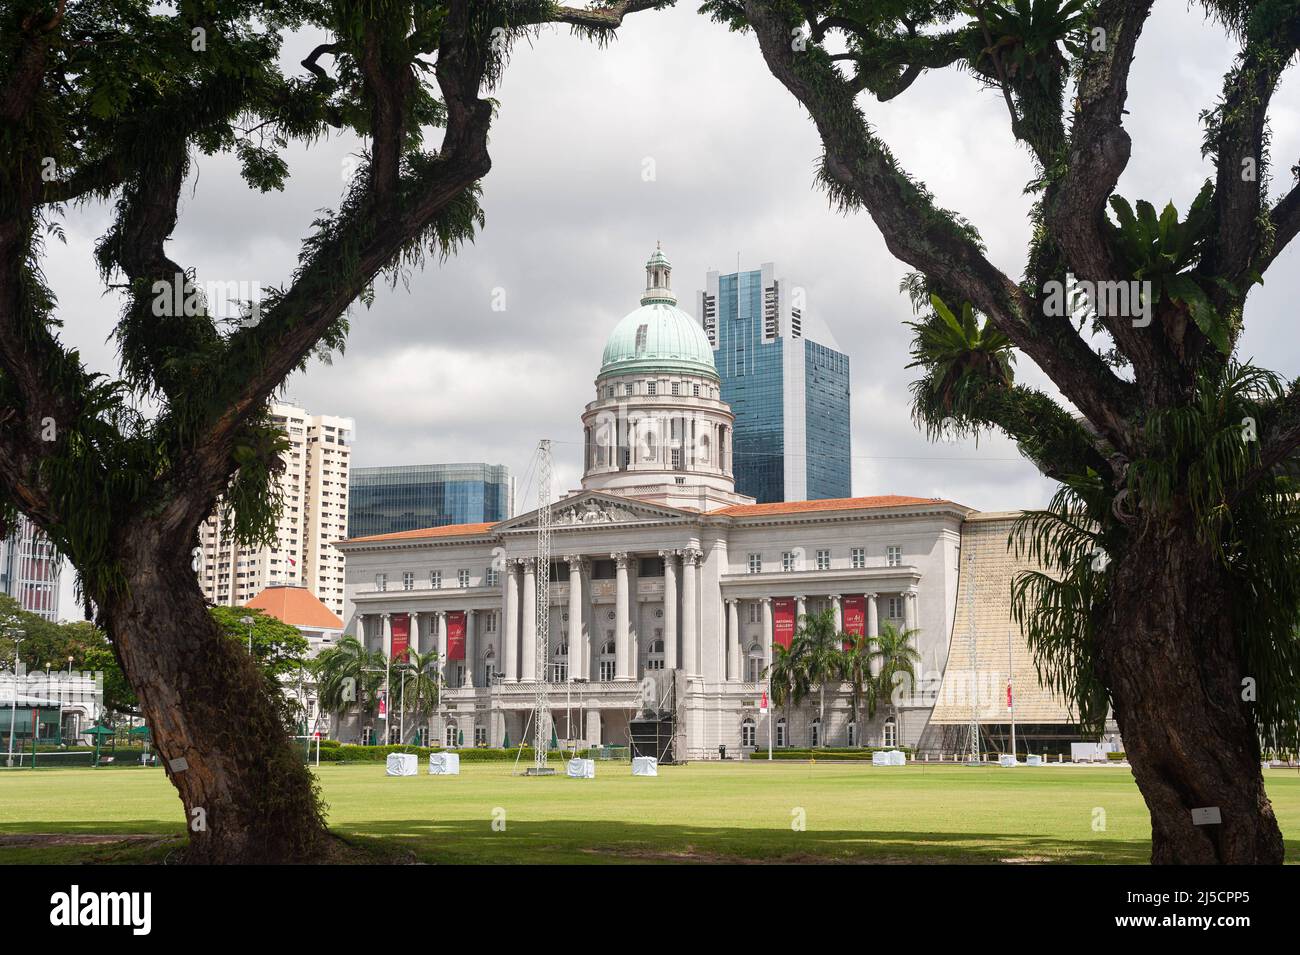 25.07.2020, Singapore, Republic of Singapore, Asia - View over the Padang playing field to the National Gallery Singapore, the former Supreme Court building and the City Hall. [automated translation] Stock Photo